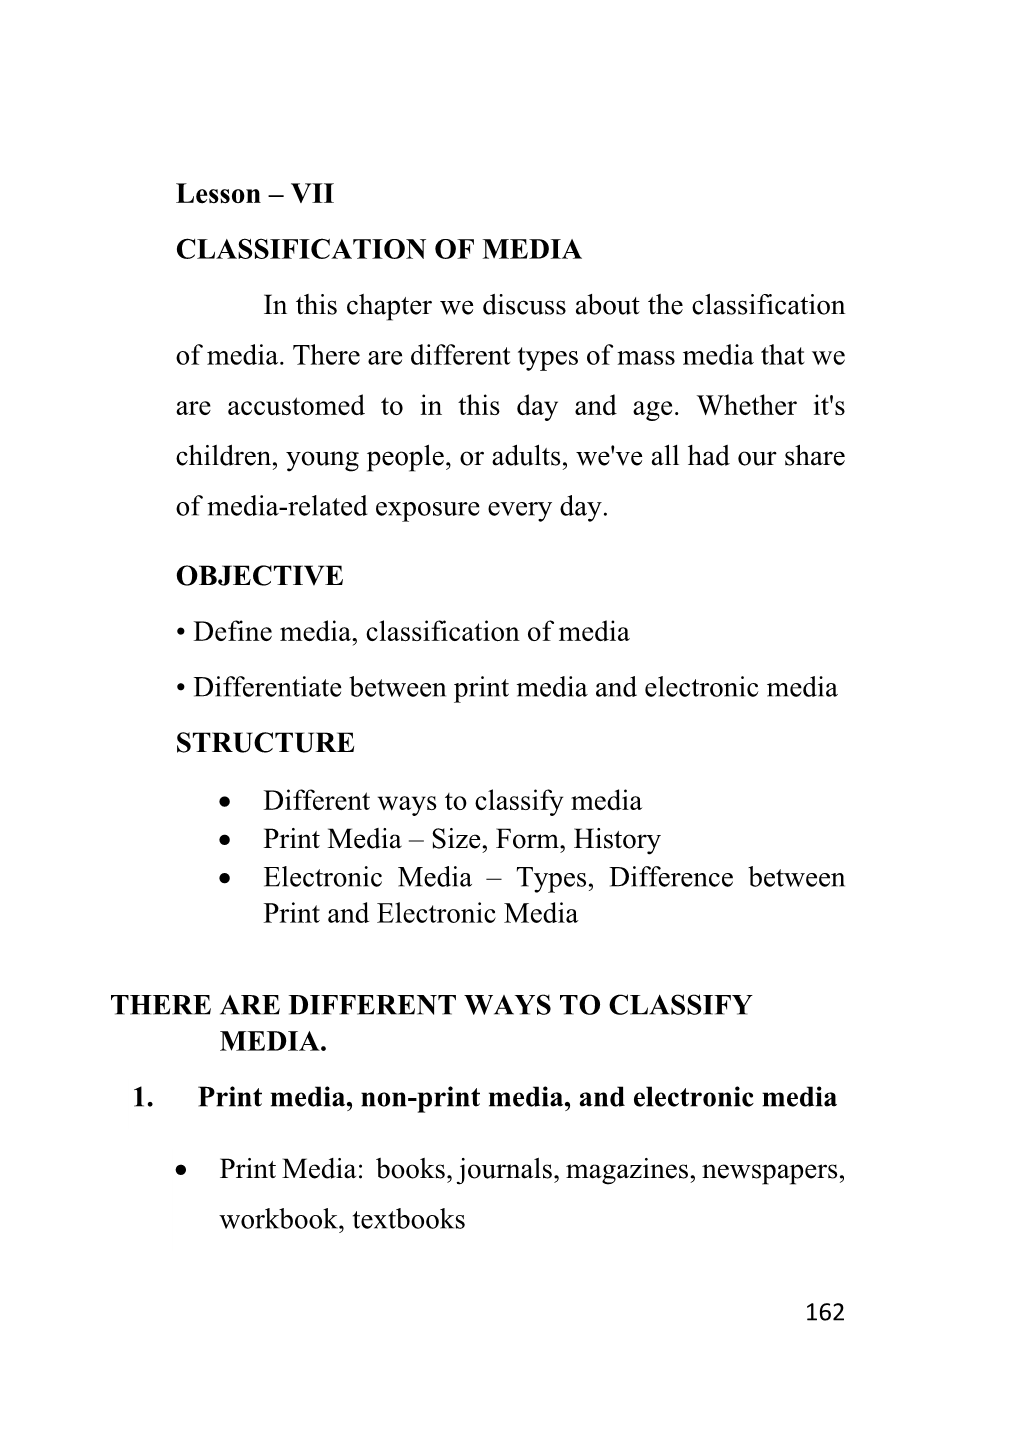 Lesson – VII CLASSIFICATION of MEDIA in This Chapter We Discuss About the Classification of Media